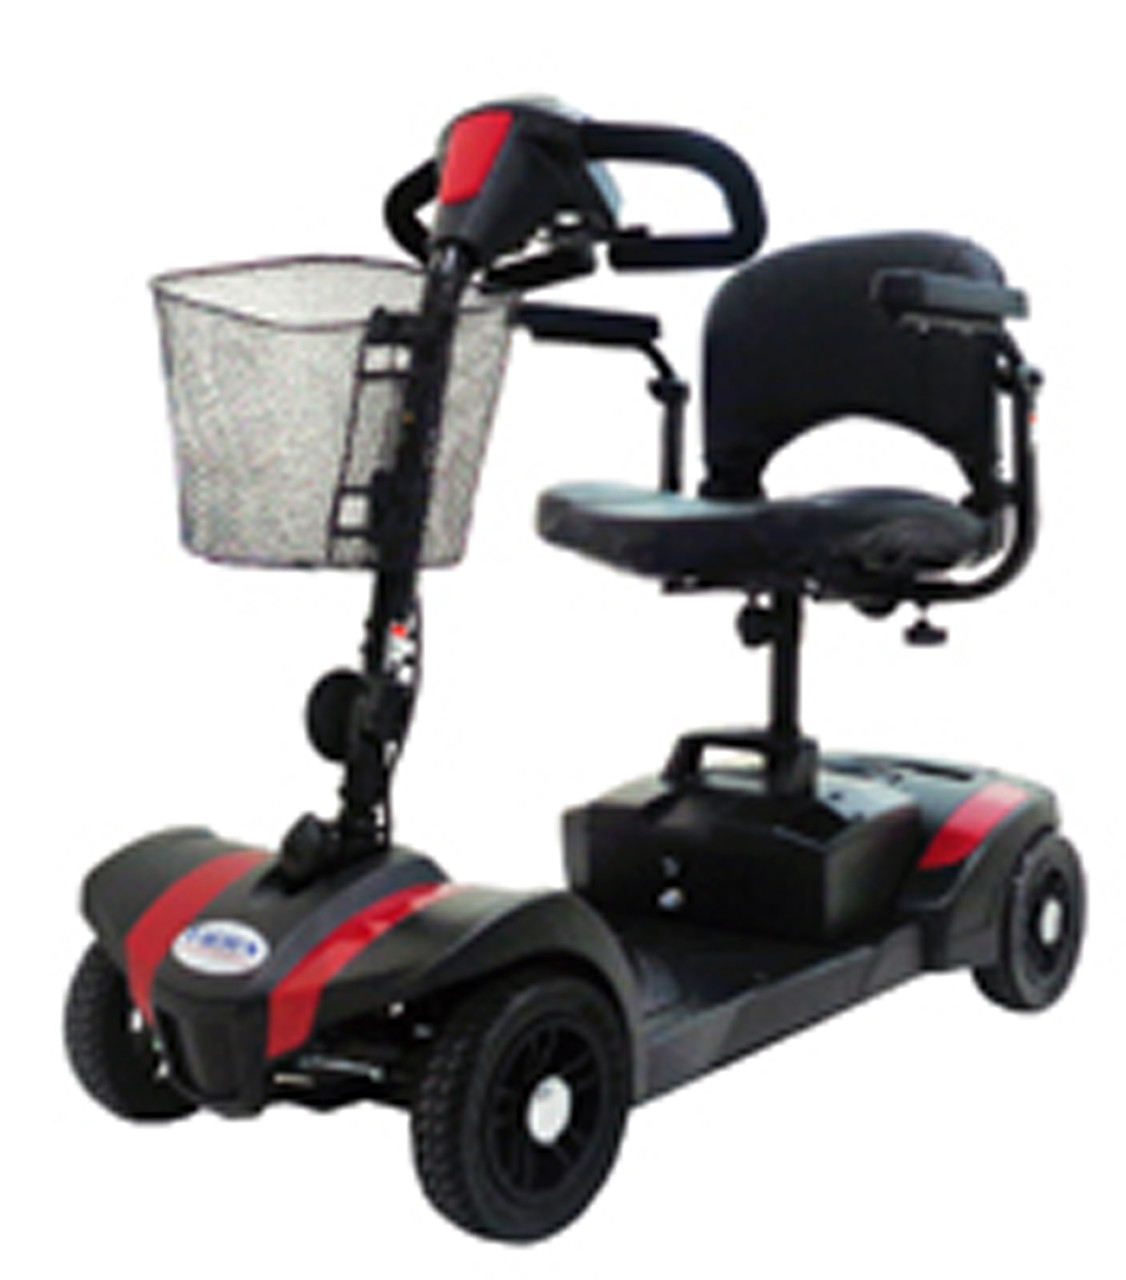 WEB Small Scooter sc s2454 74554.1473456798